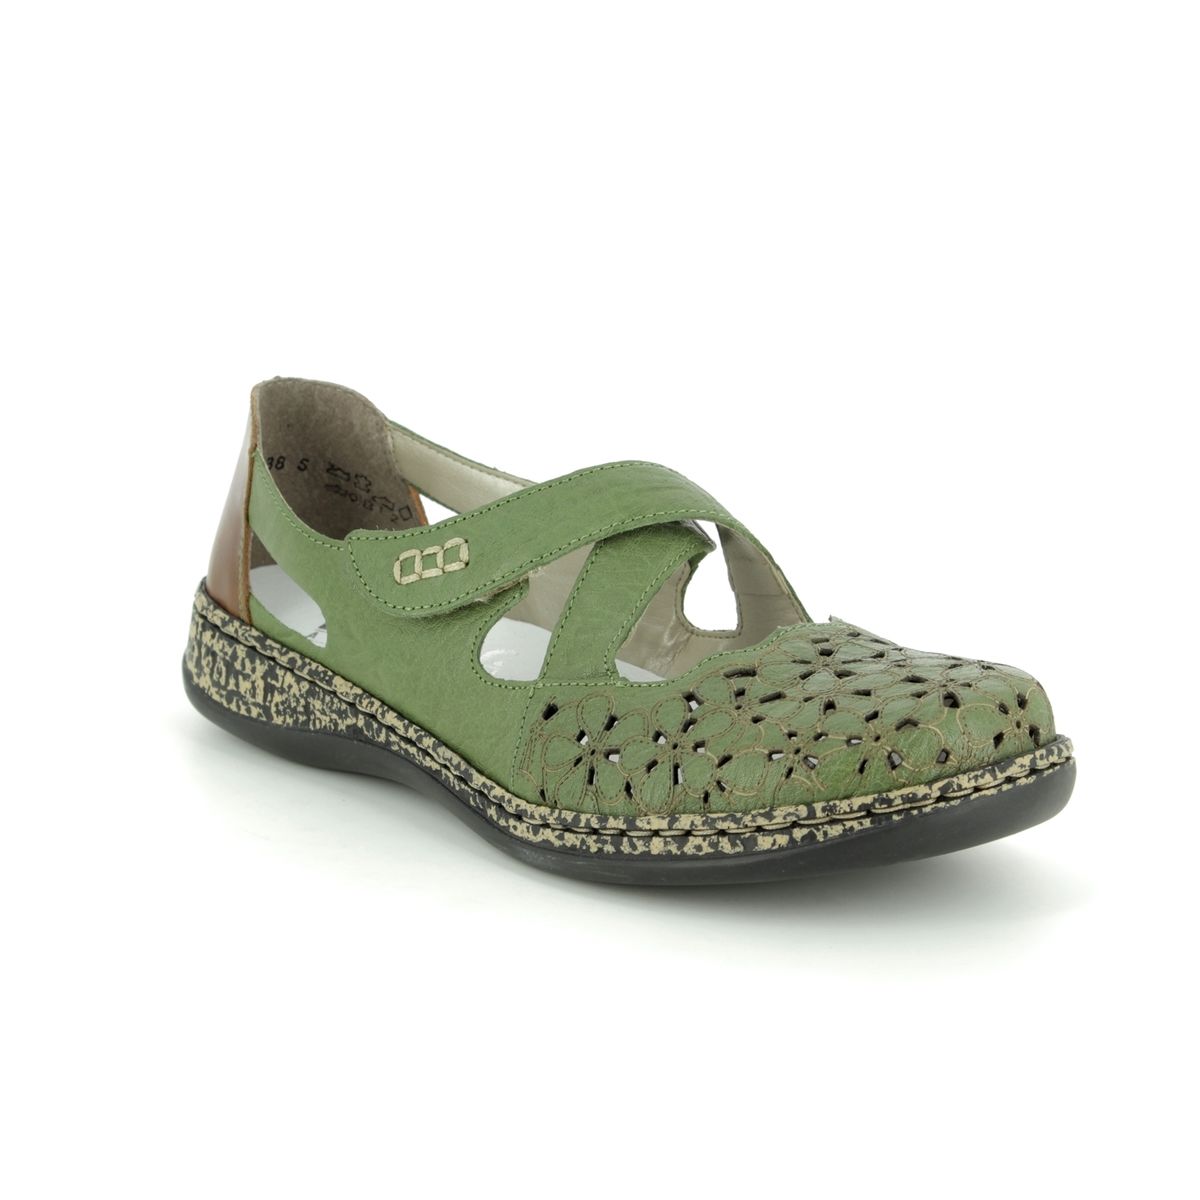 rieker ladies mary jane shoes